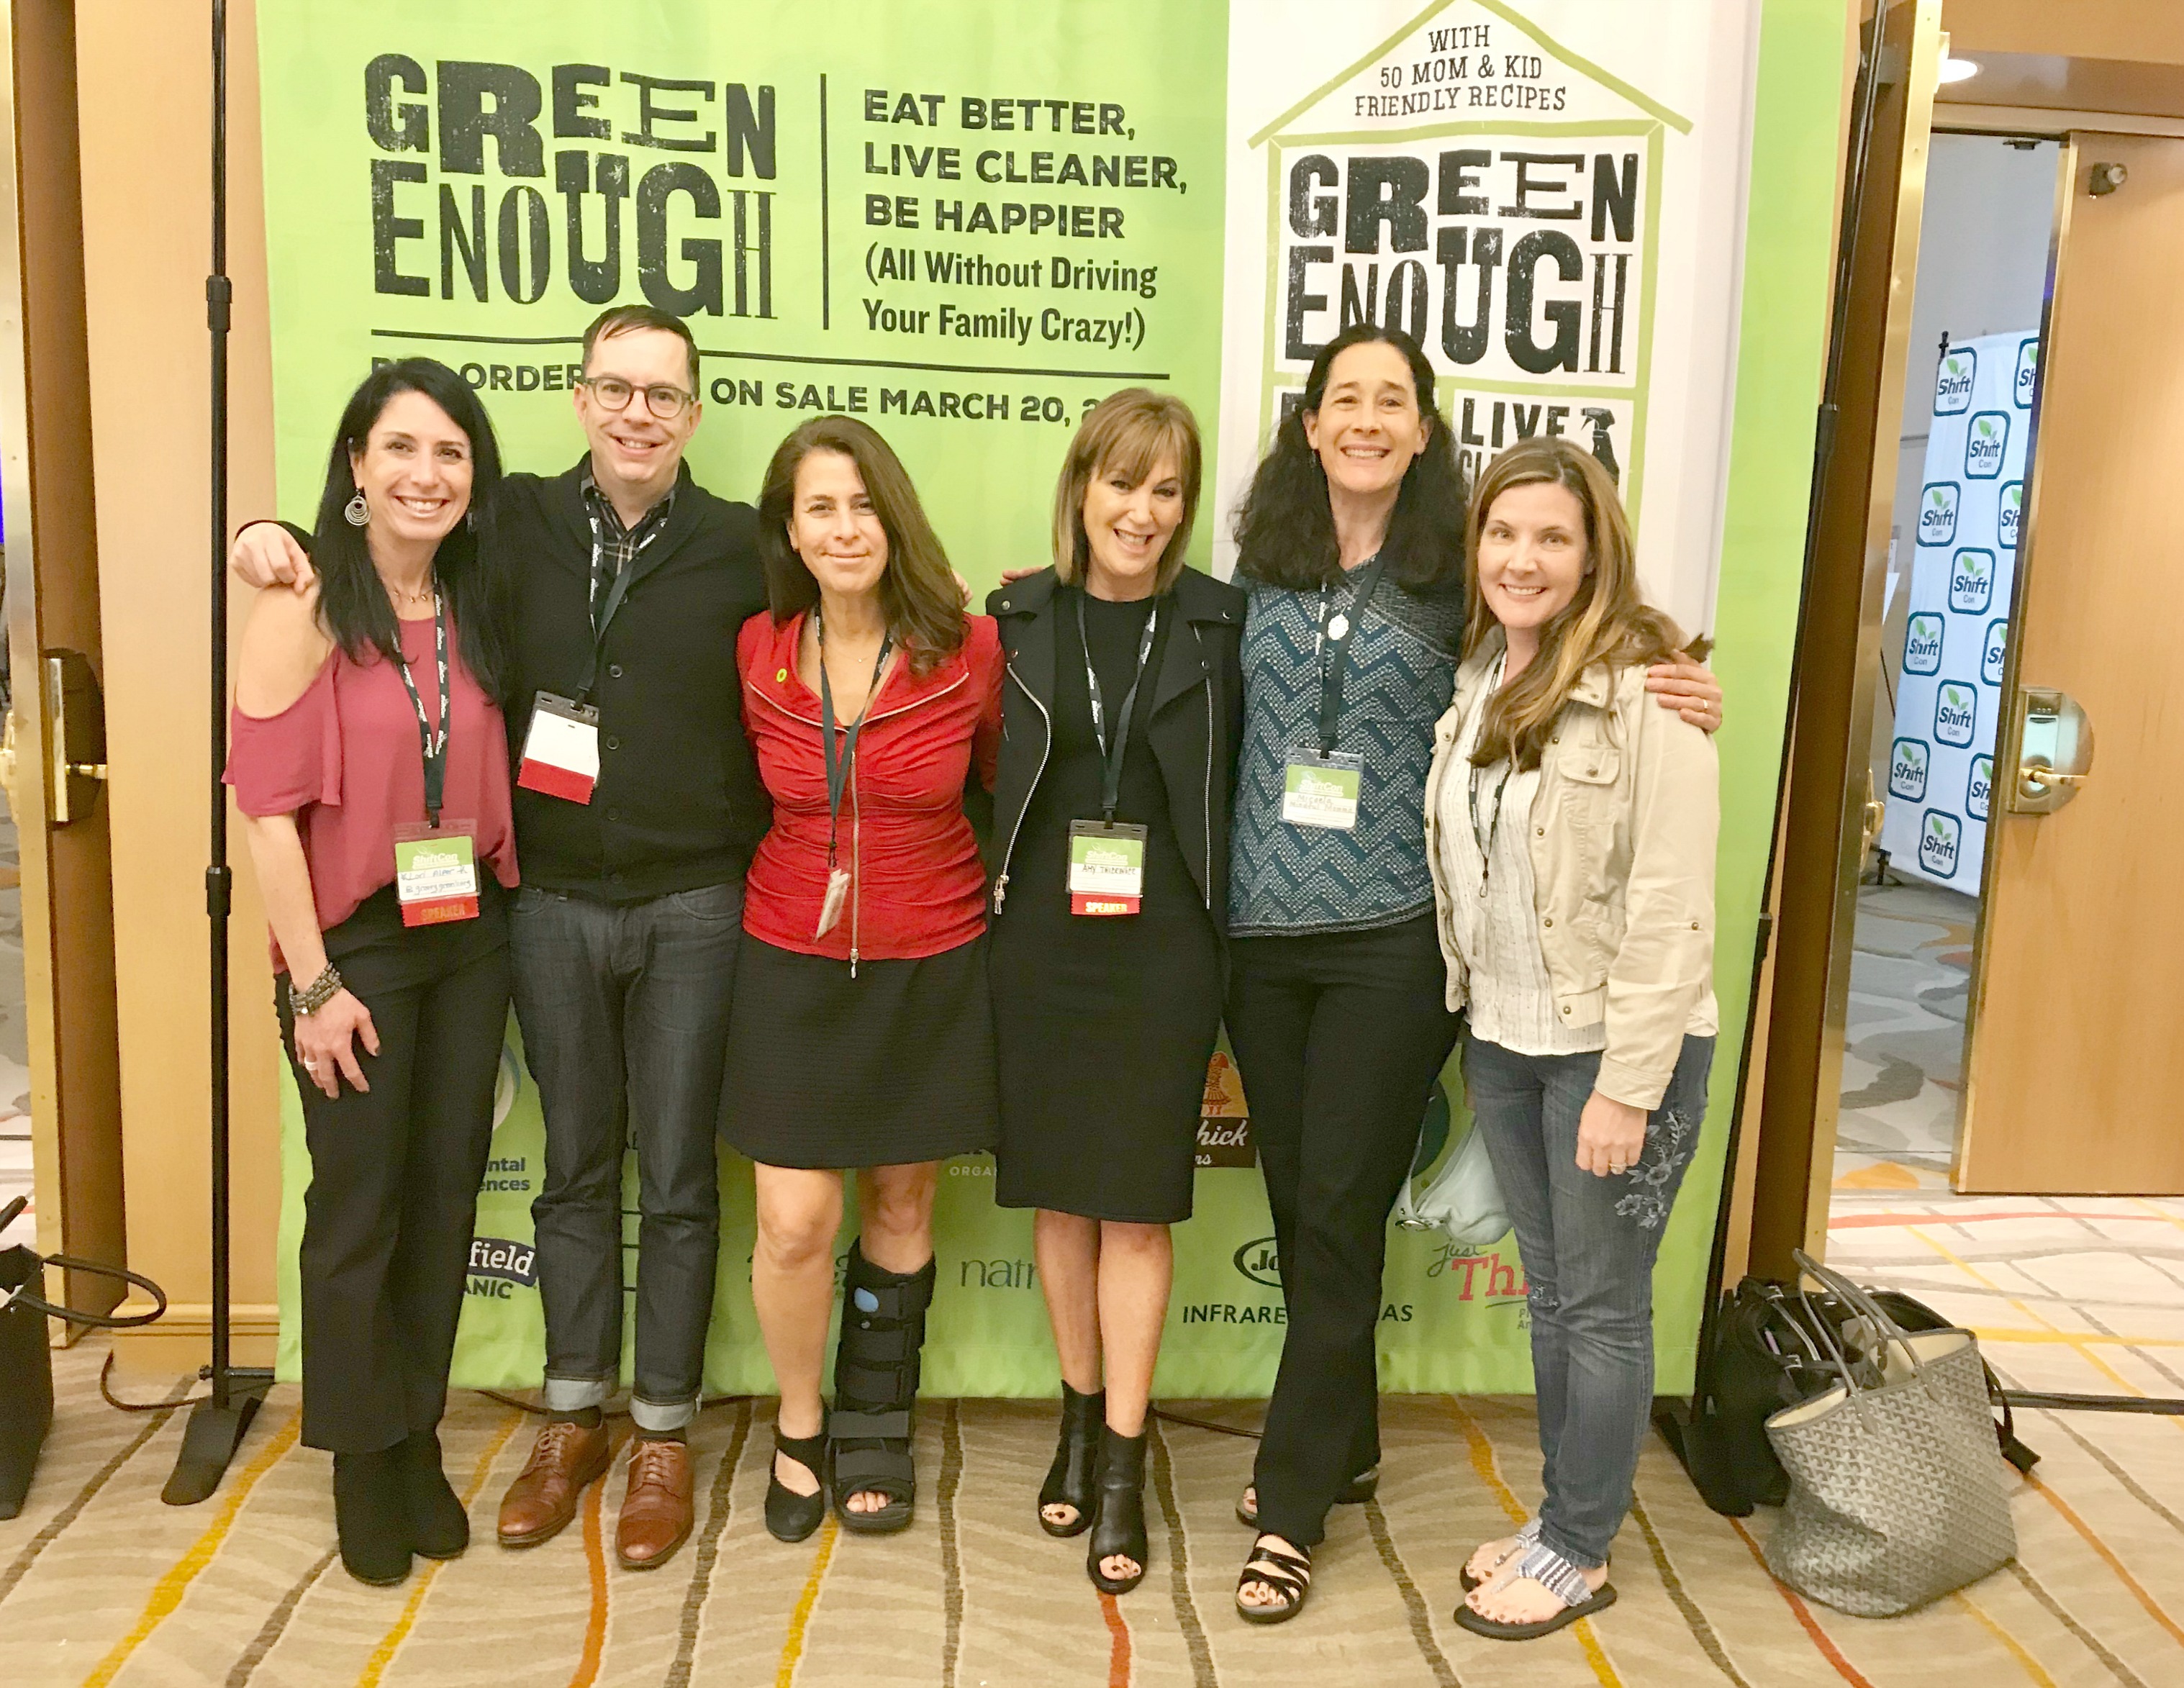 7 (More) Things I Learned at ShiftCon Groovy Green Living